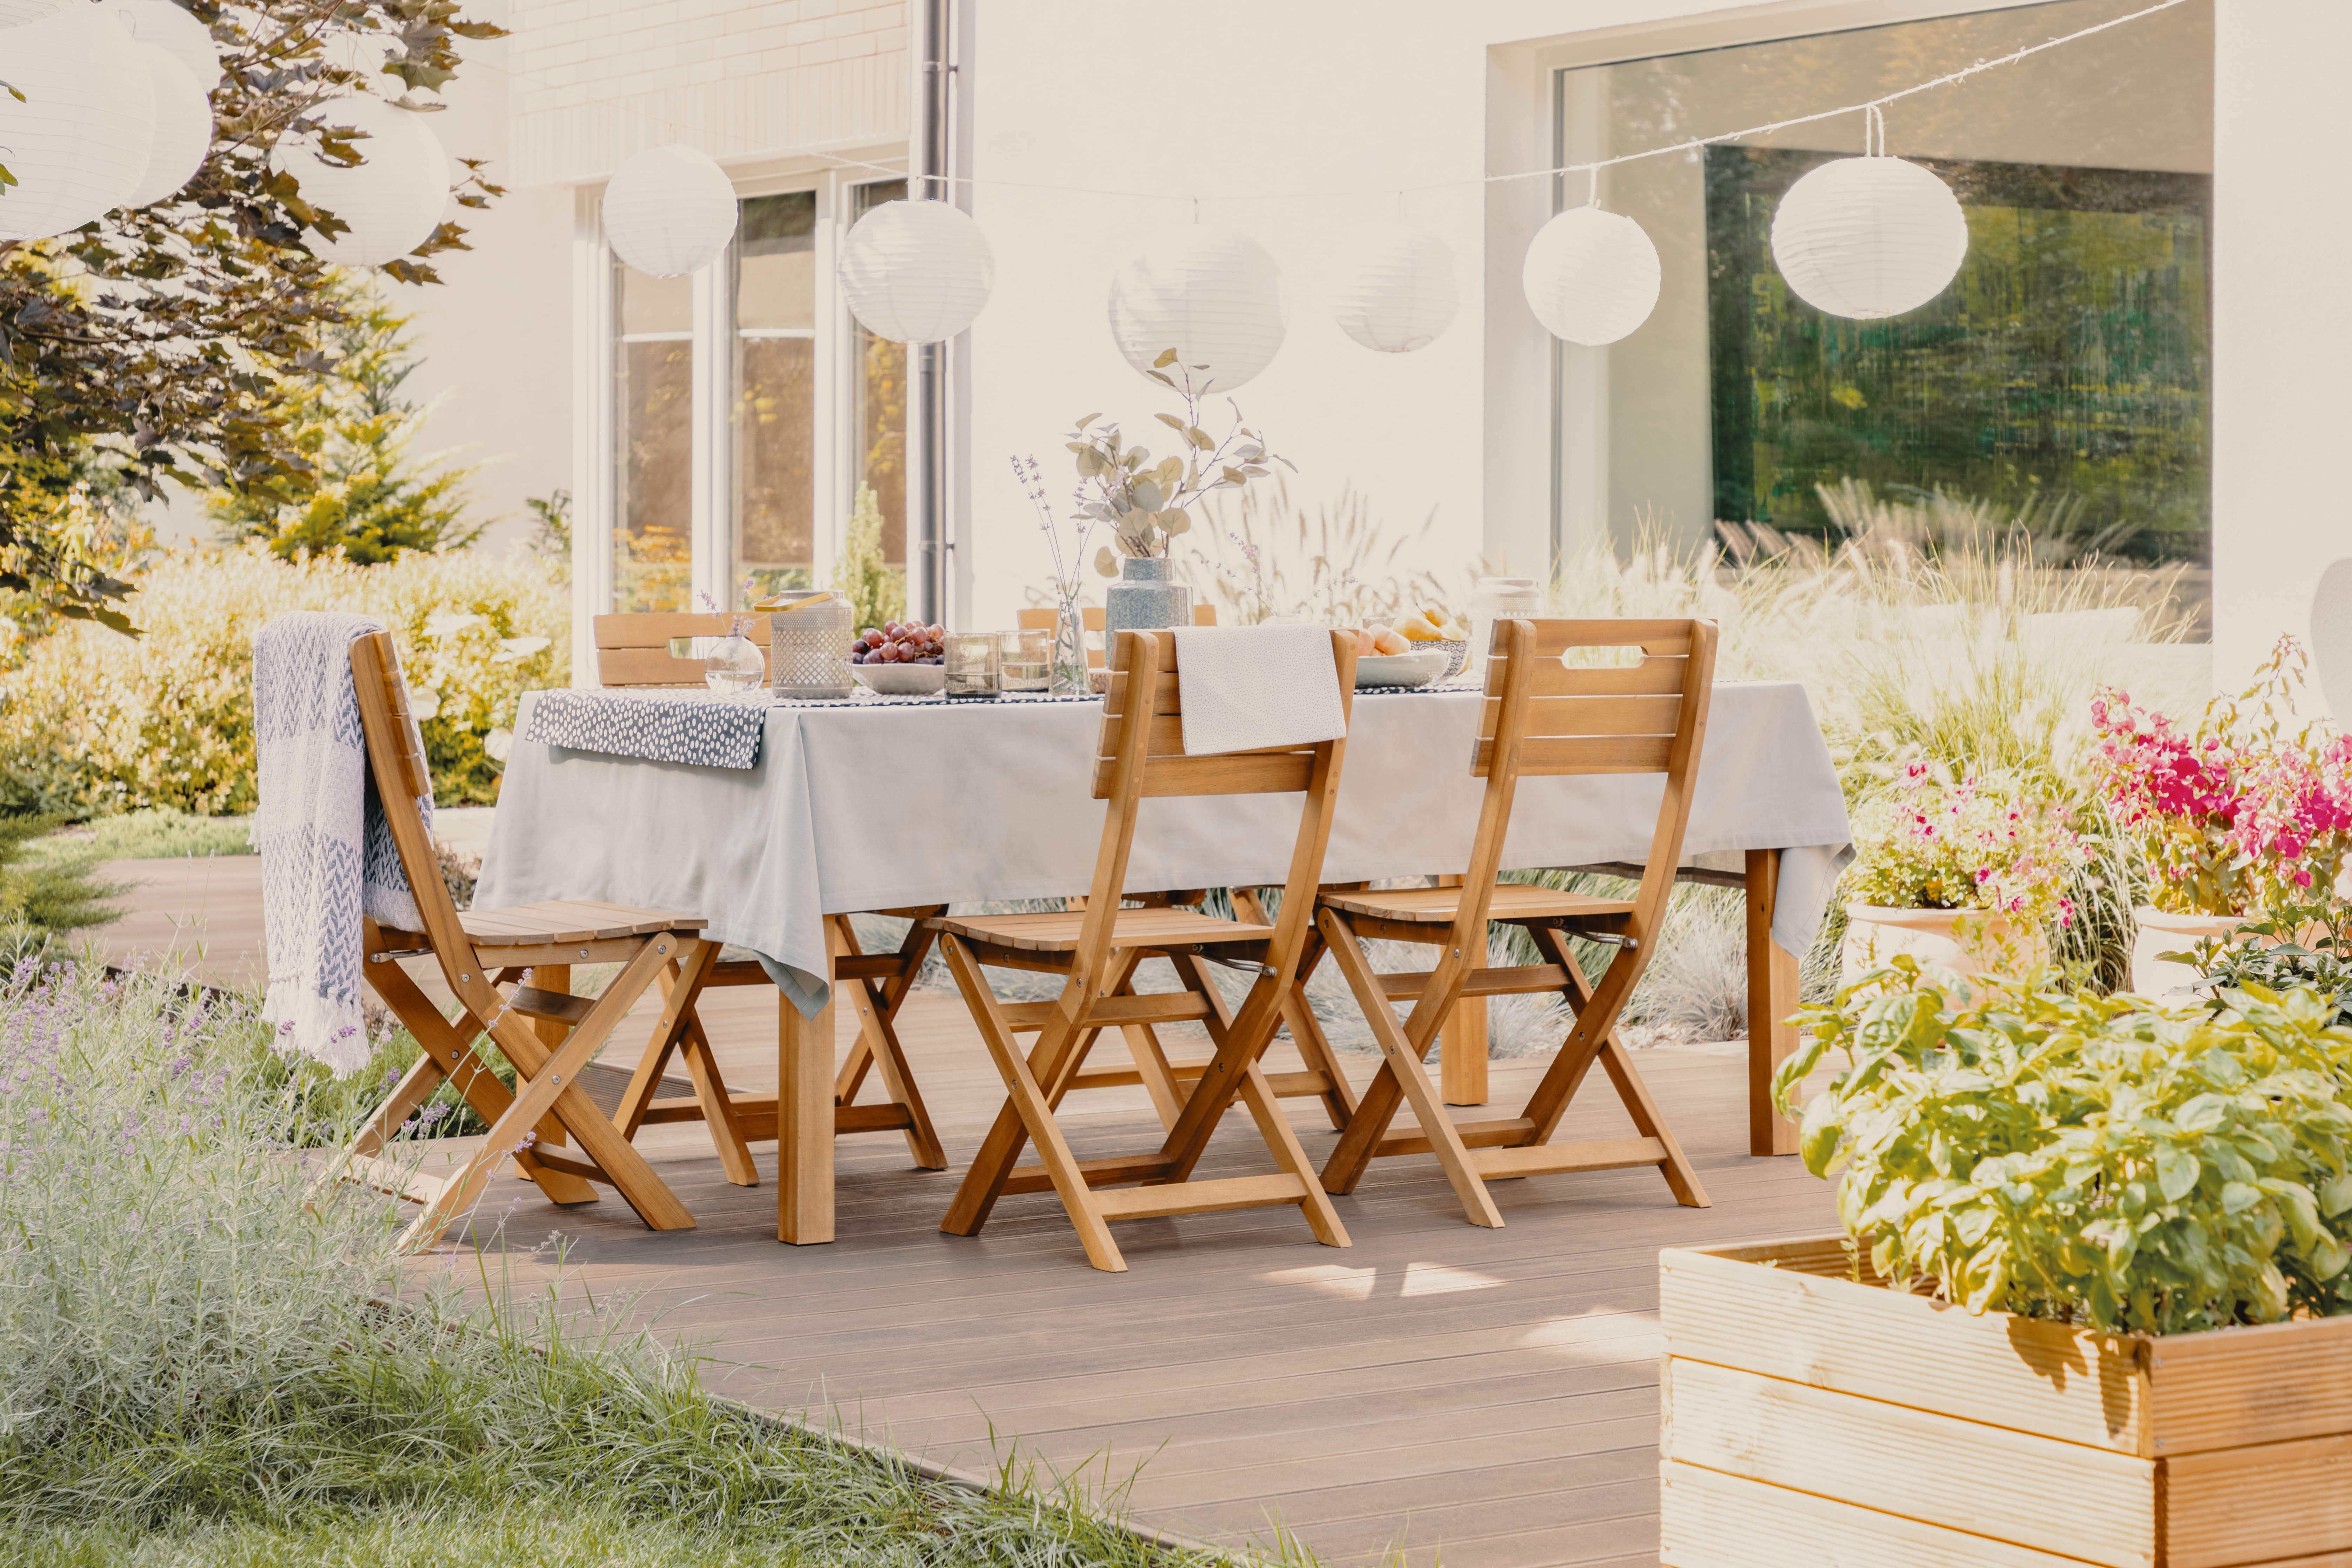 outdoor-dining-room-with-wooden-garden-furniture-V58W67C-min